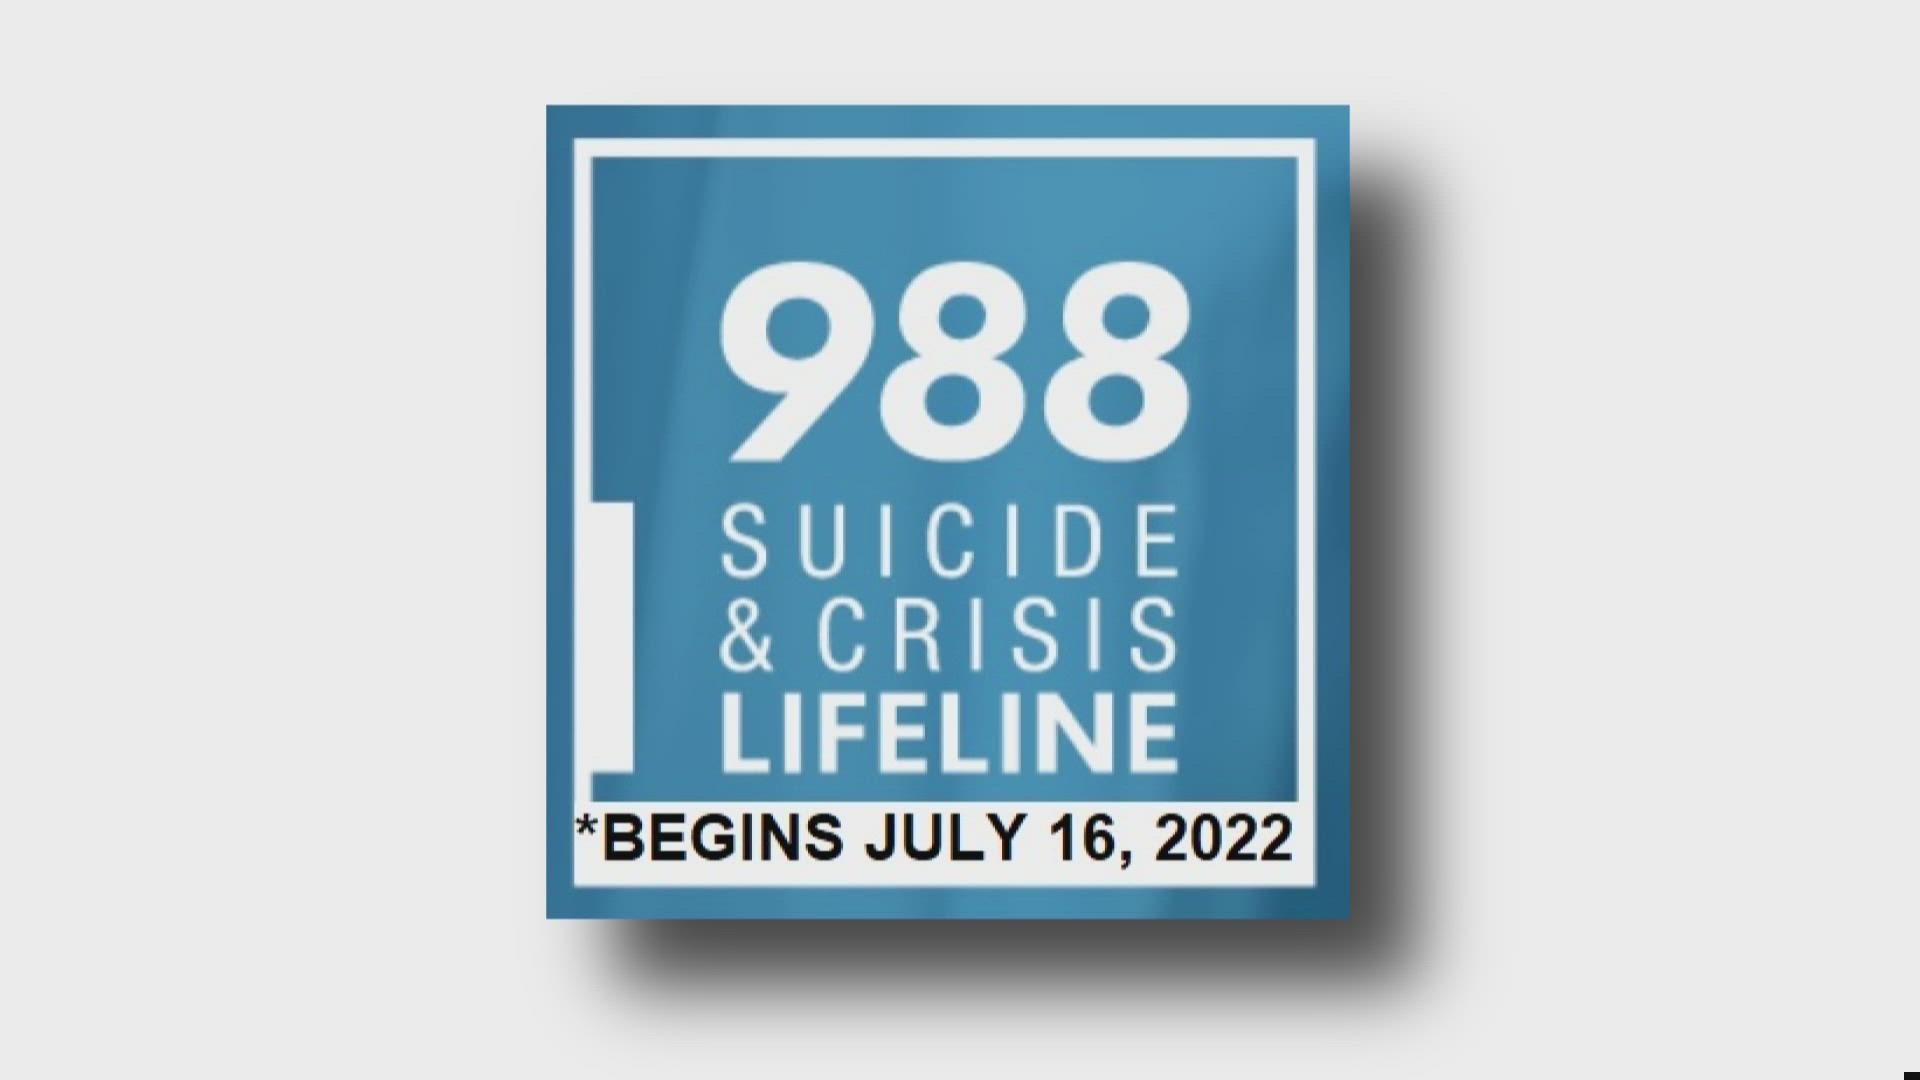 You can now call or text 988 if you are experiencing a mental health crisis.